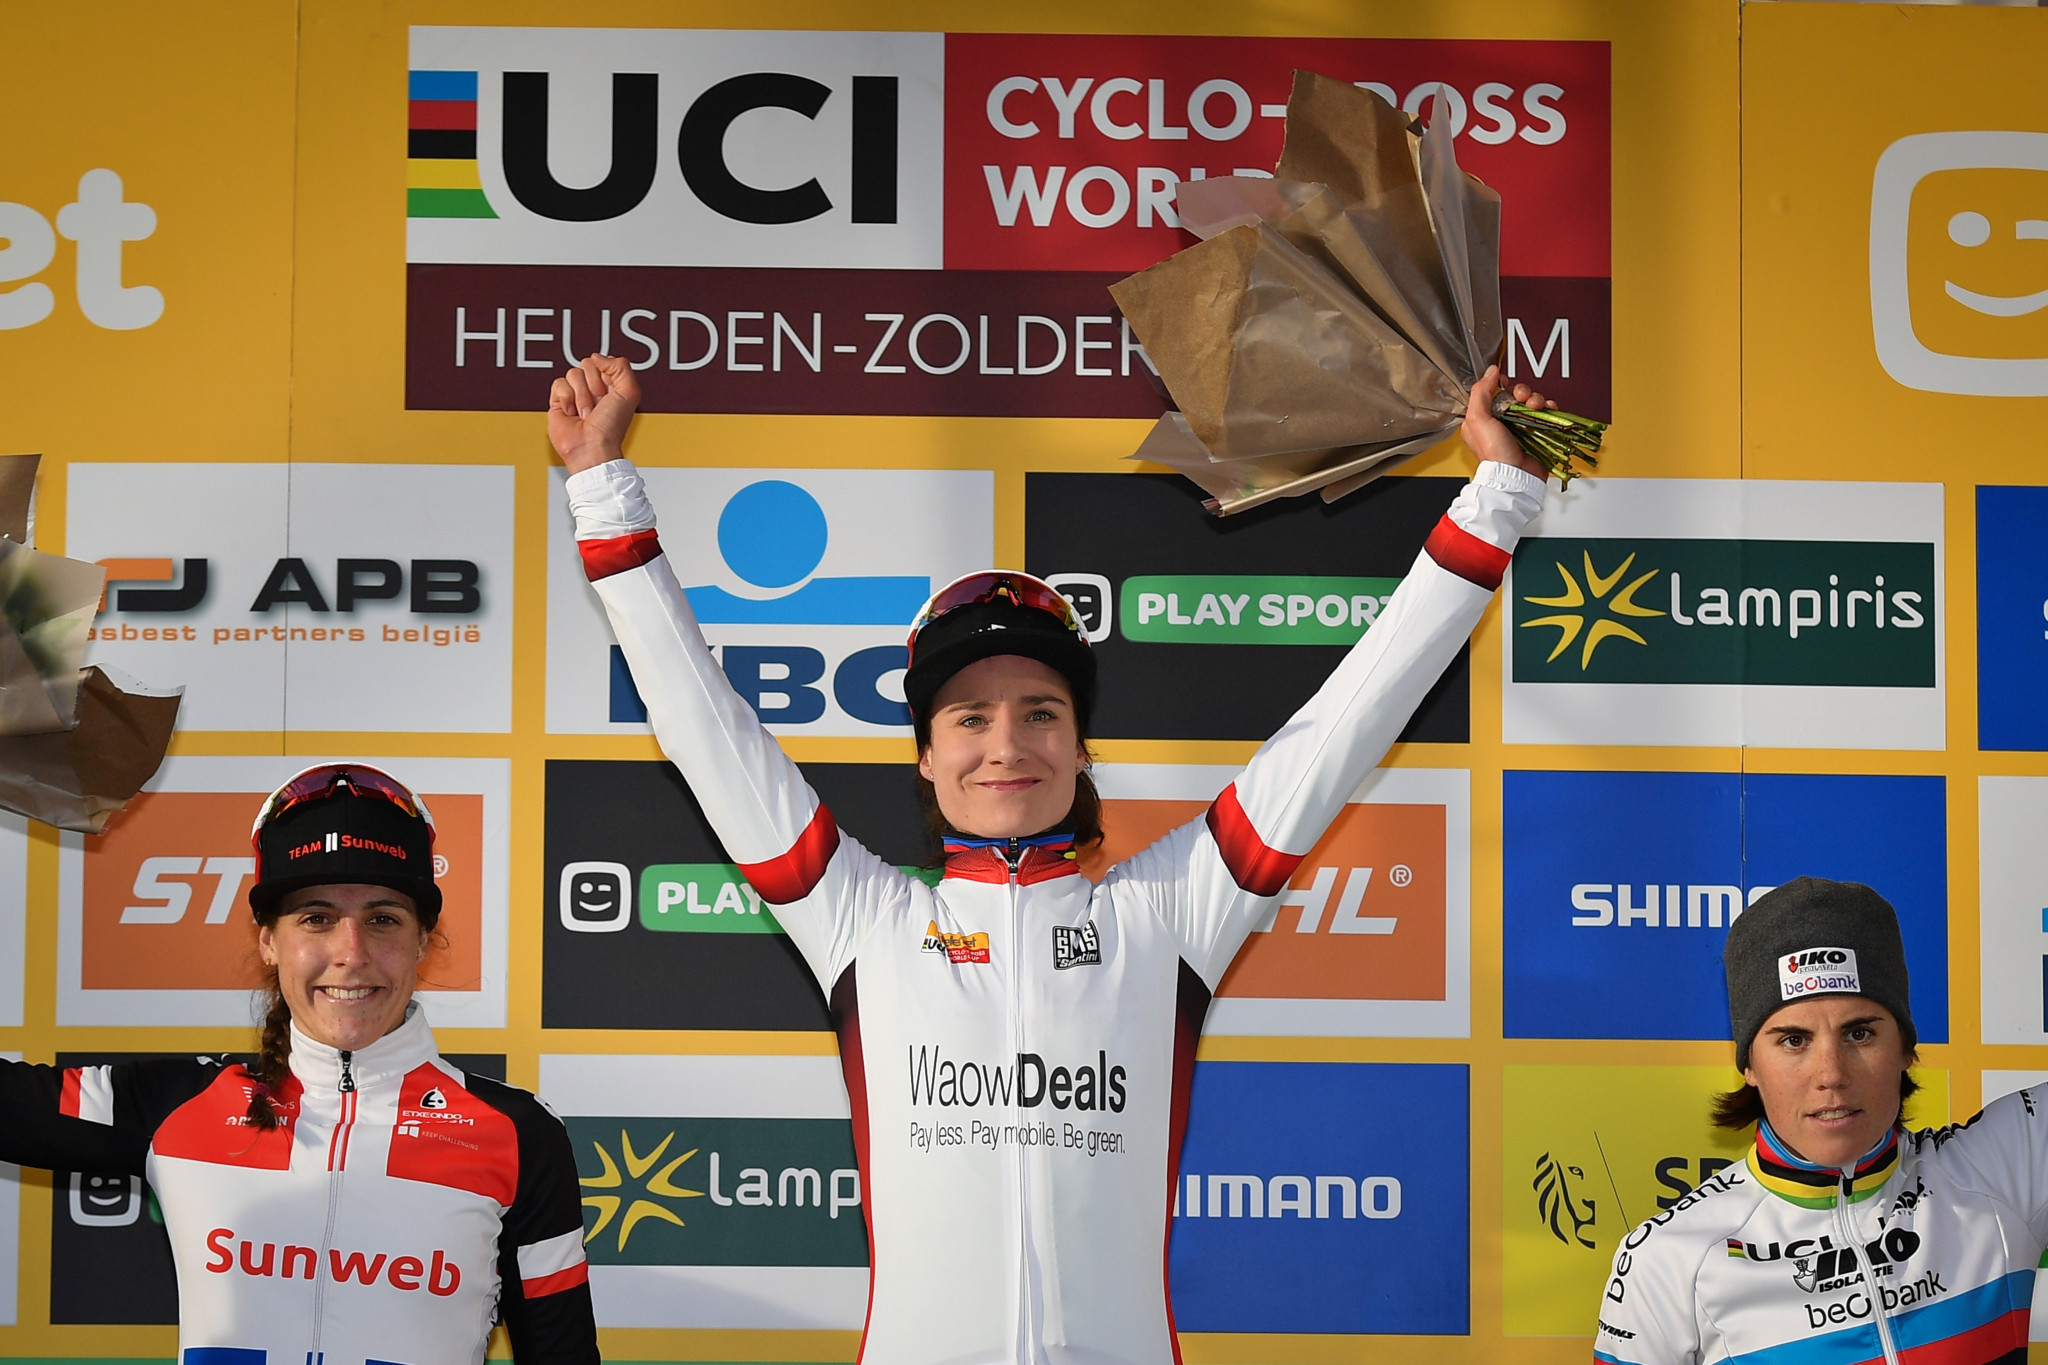 Vos wins in Pontchâteau to seal overall UCI Cyclo-Cross World Cup title